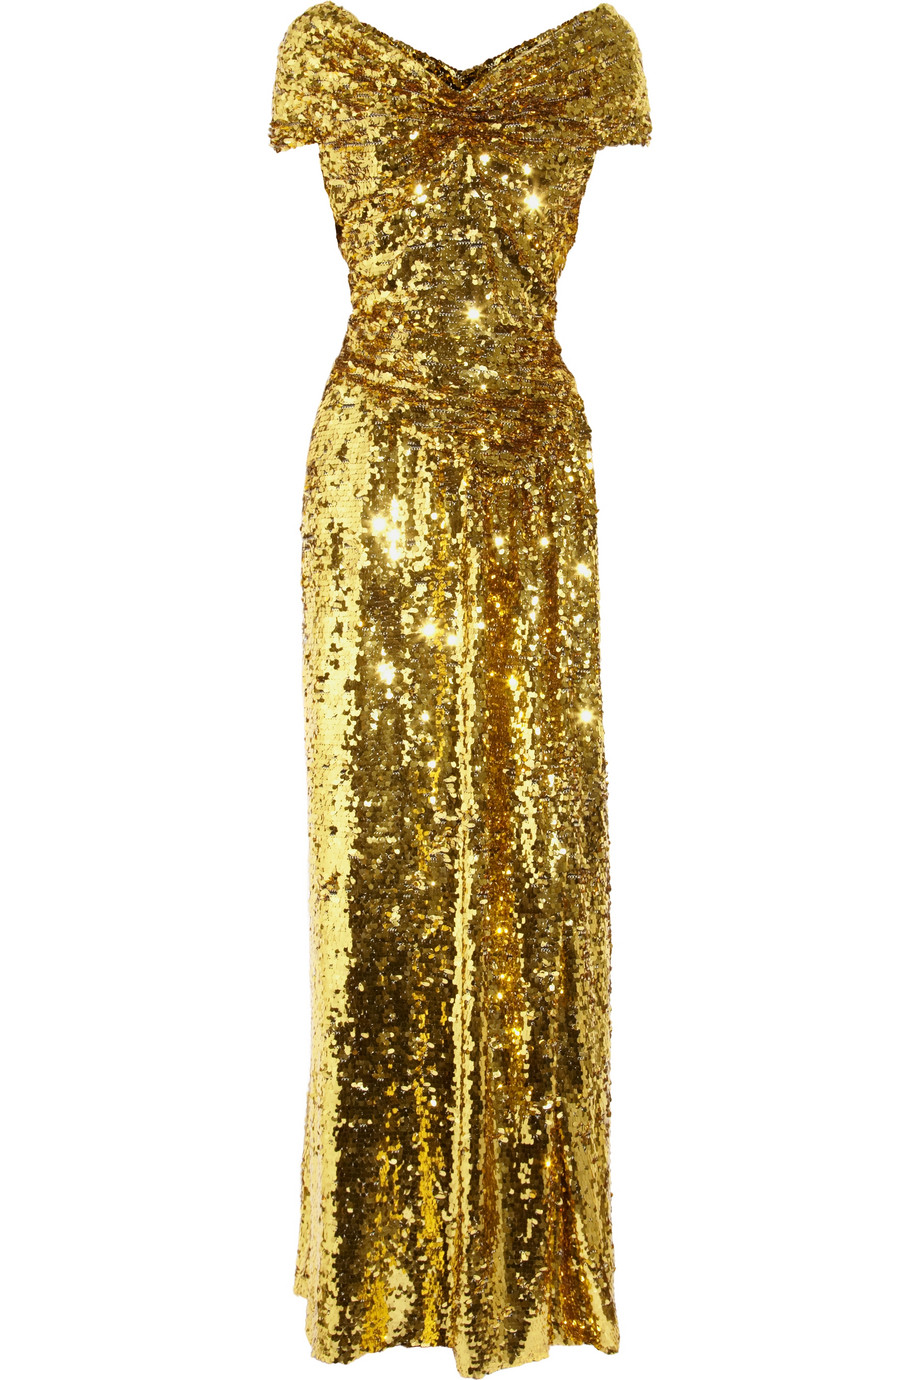 Vivienne westwood gold label Long Glazing Metallic Sequined Gown in ...